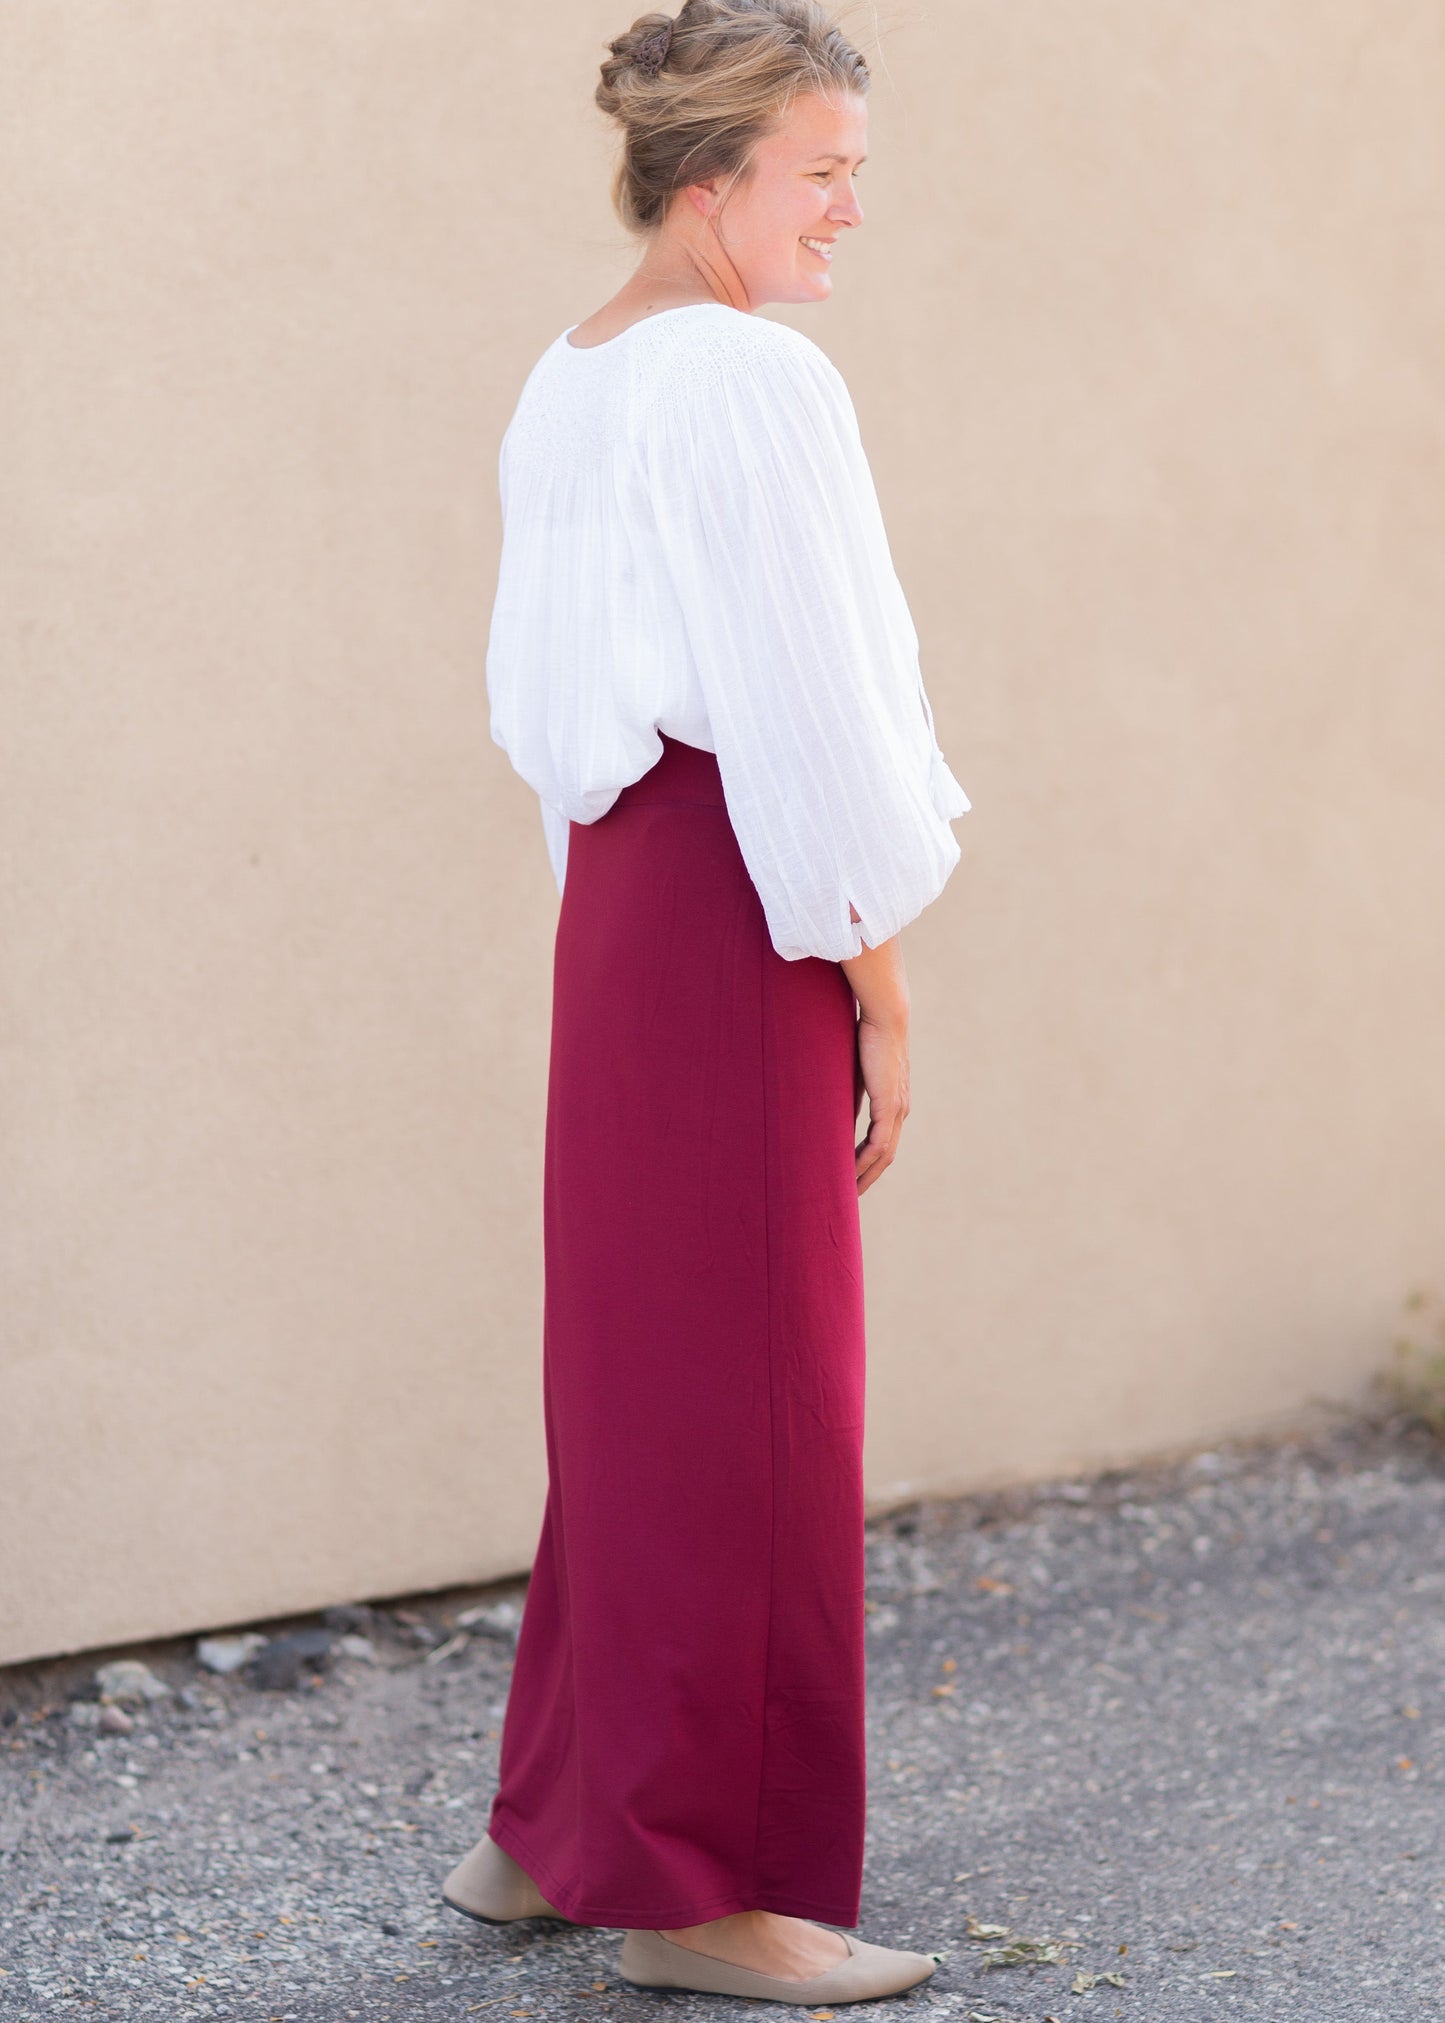 Clarise Burgundy Premium Knit Maxi Skirt is and inherit design that is a maxi knit skirt and is fully lined.